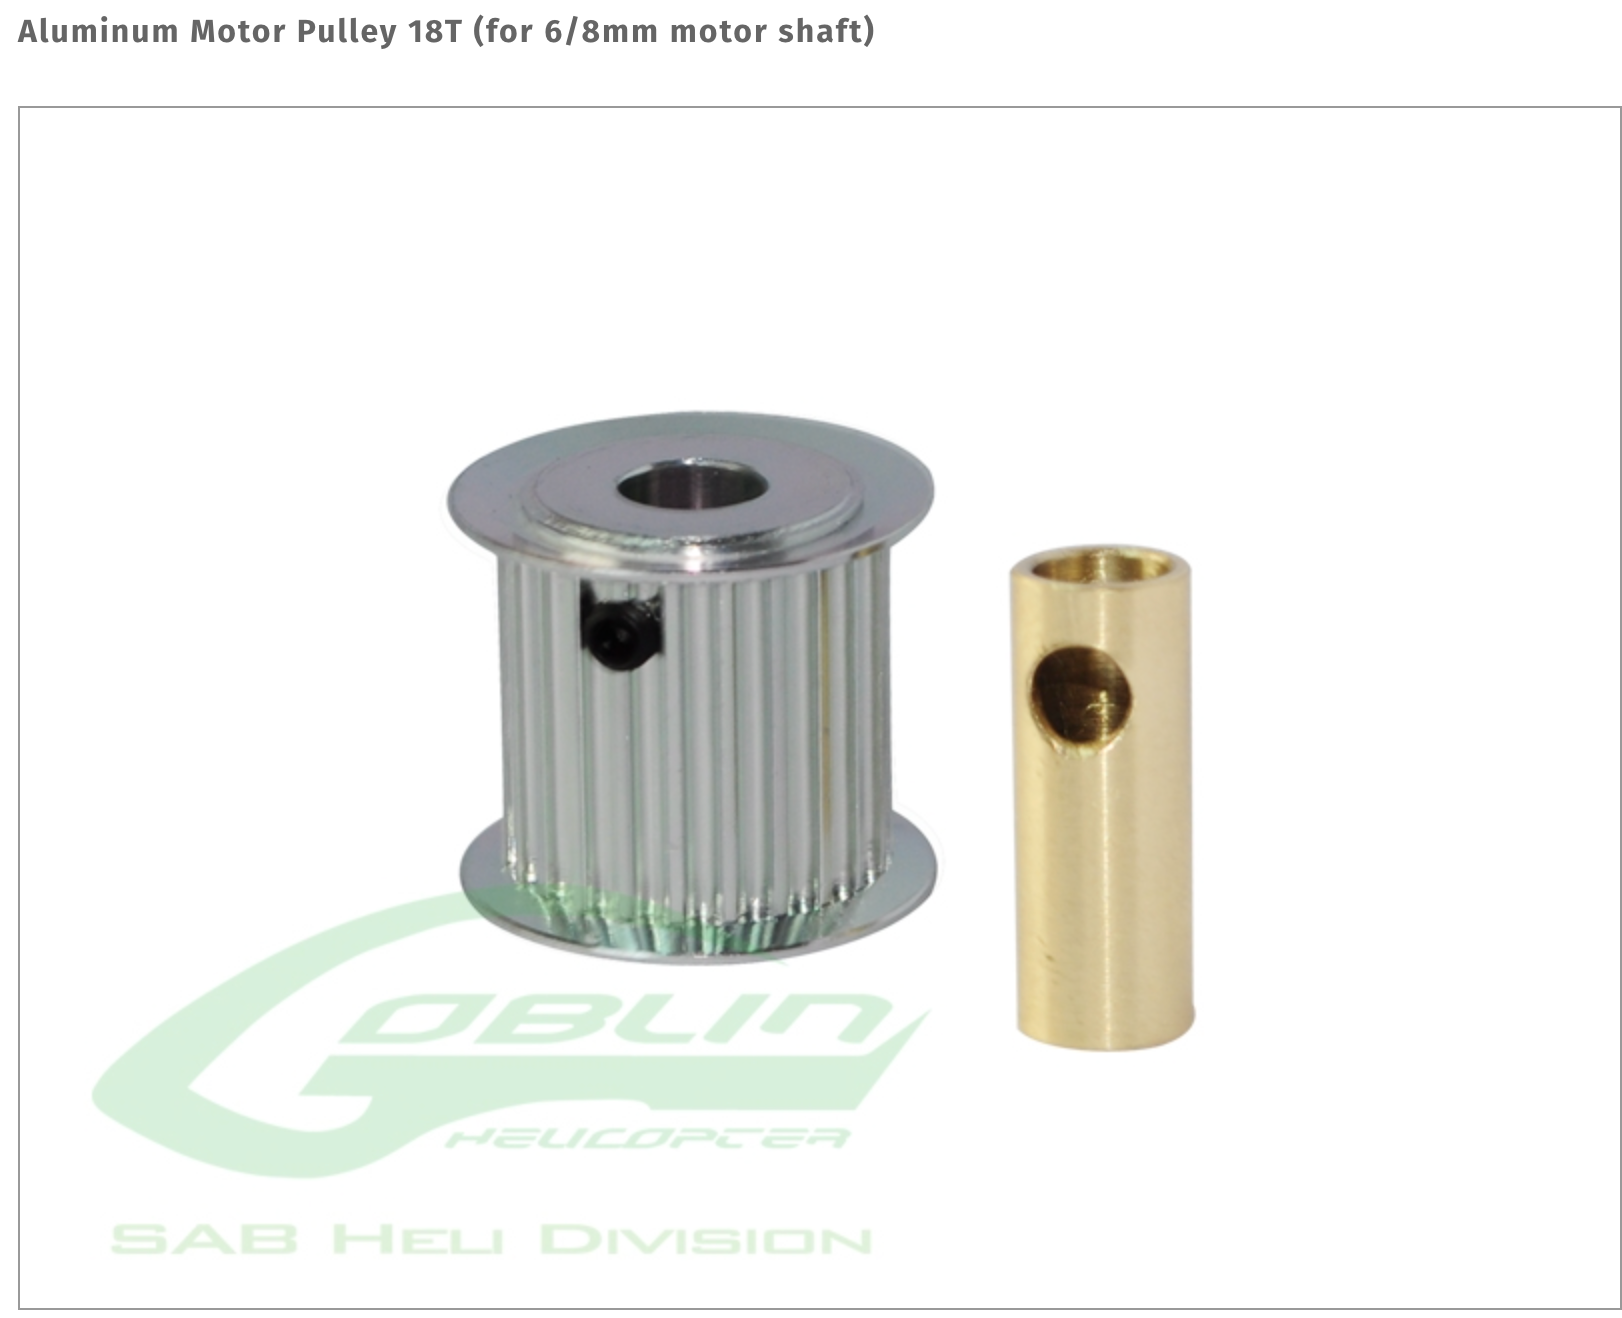 H0175-18-S Motor Pulley 18T (for 6/8mm motor shaft)